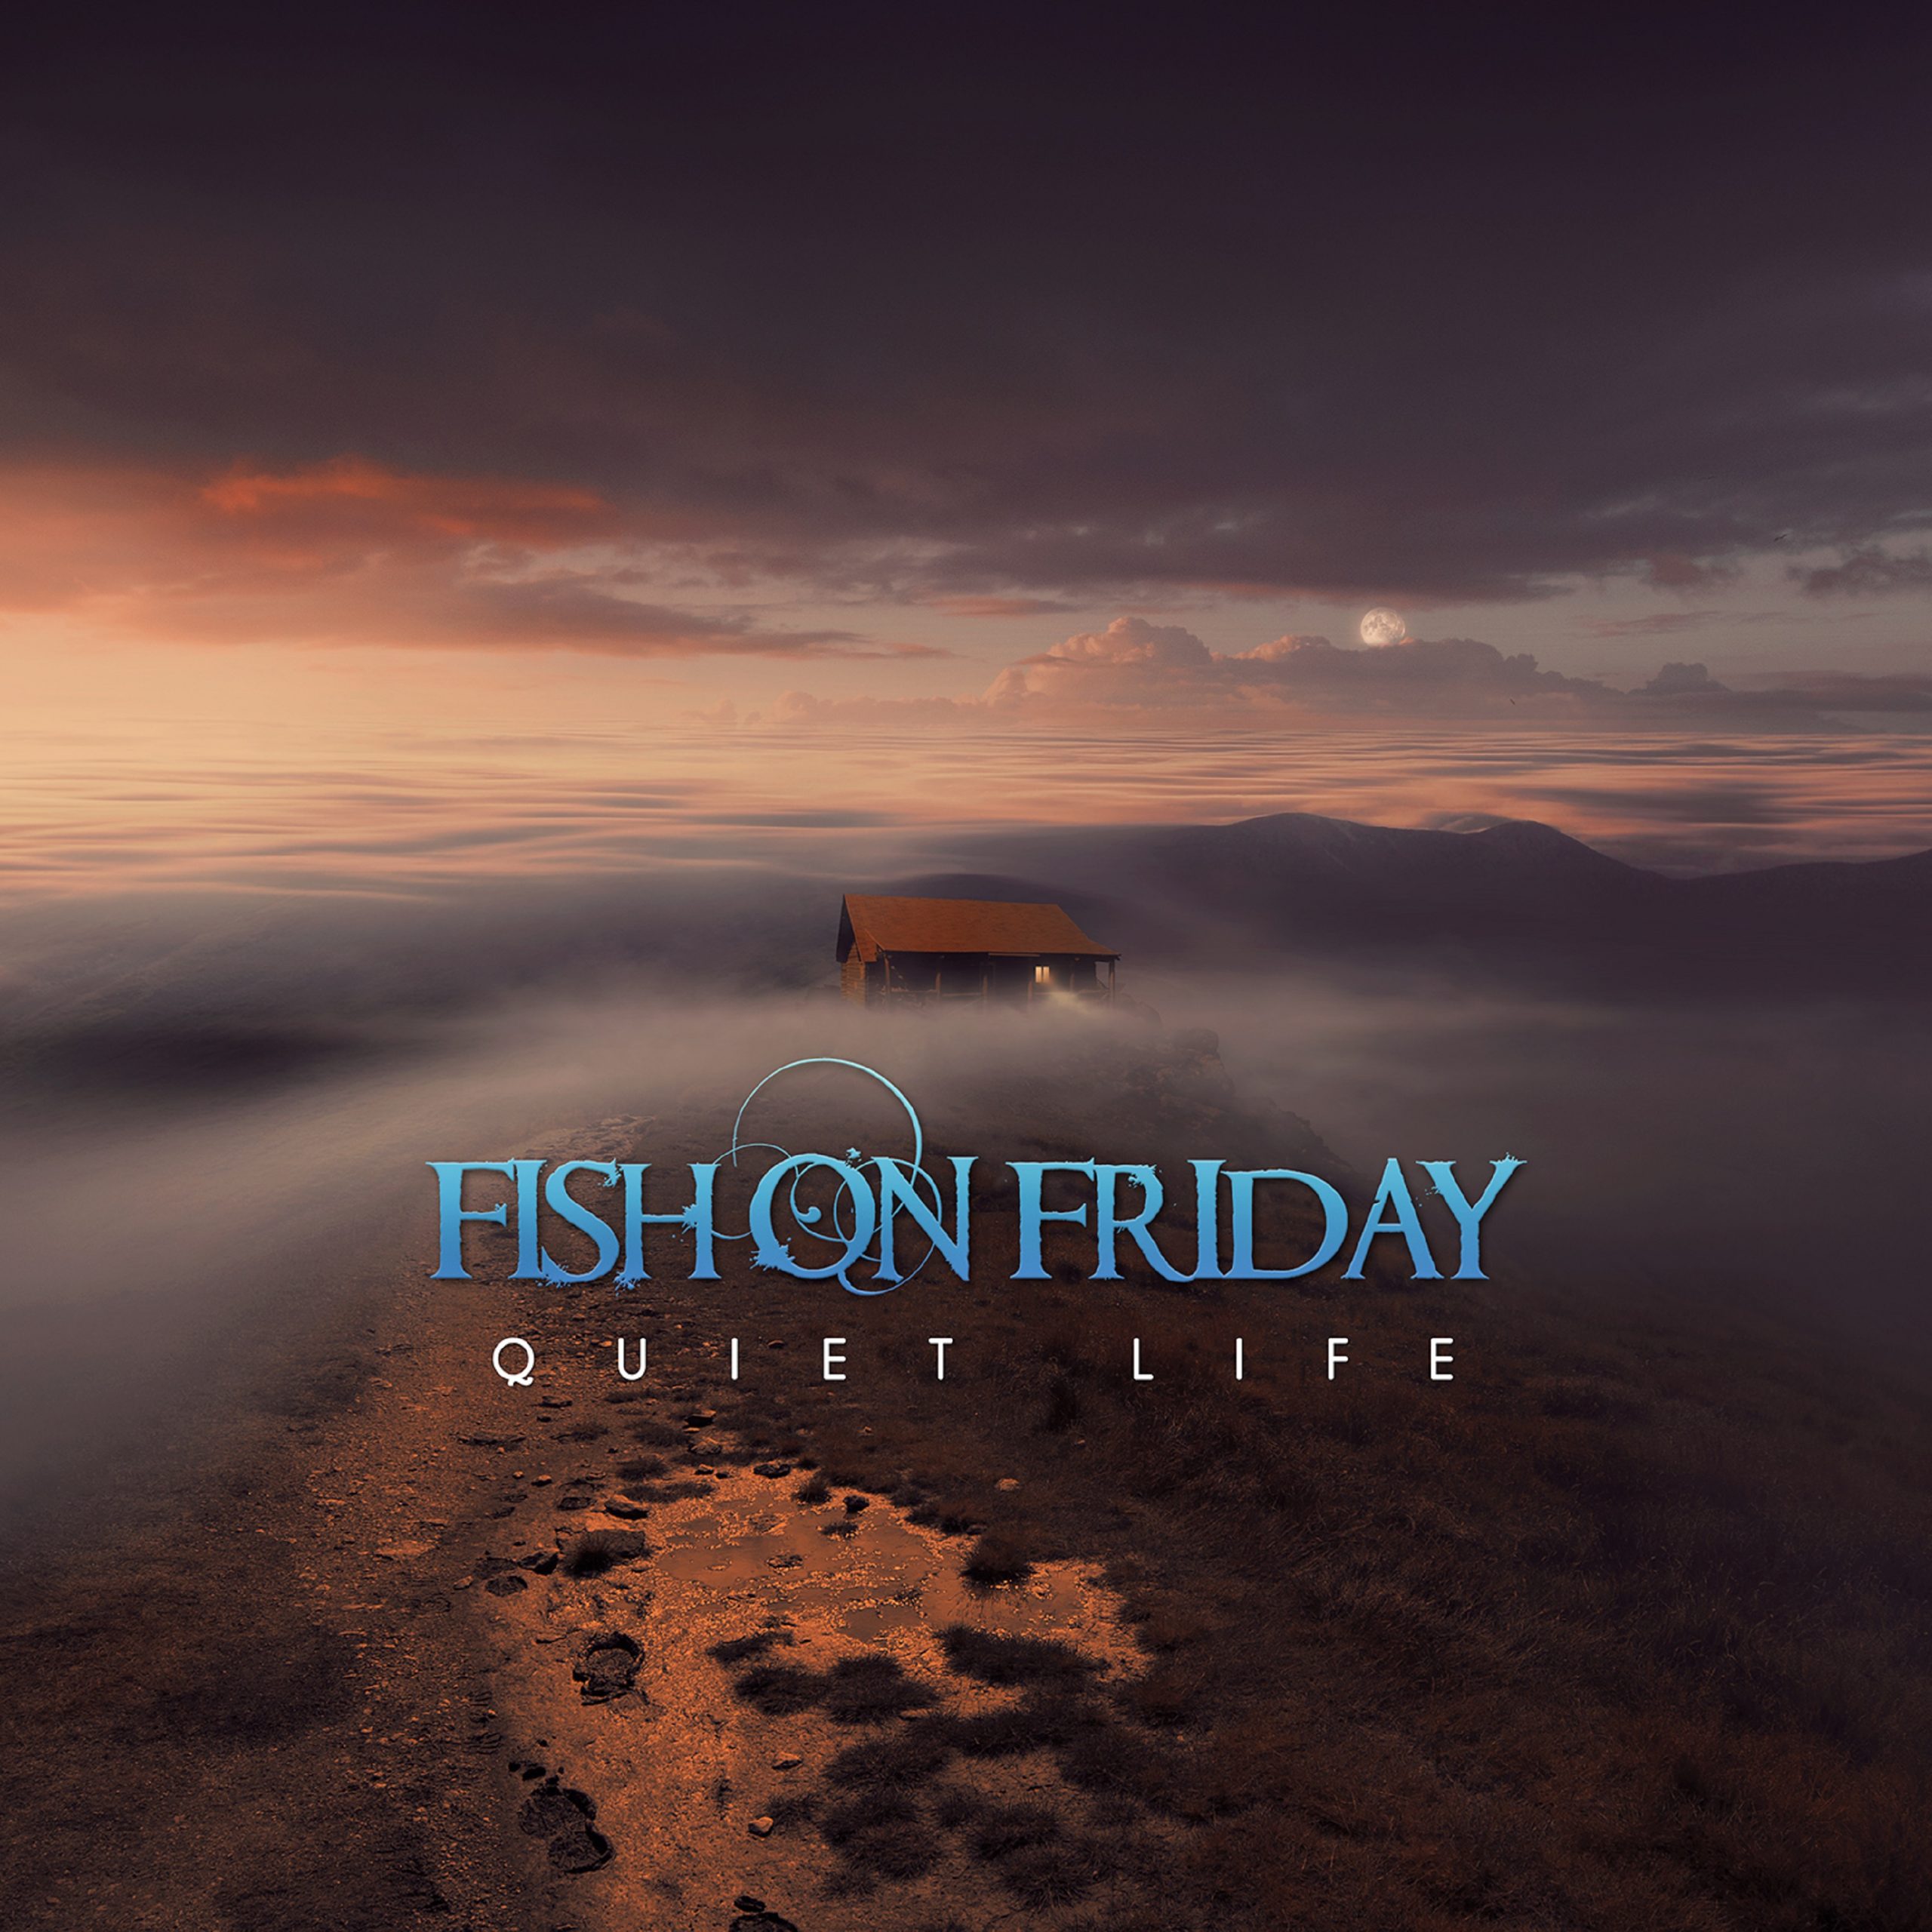 Quite life. Fish on Friday - 2017 - quiet Life. Fish on Friday discography. Слушать Fish on. Surreal Fishing.